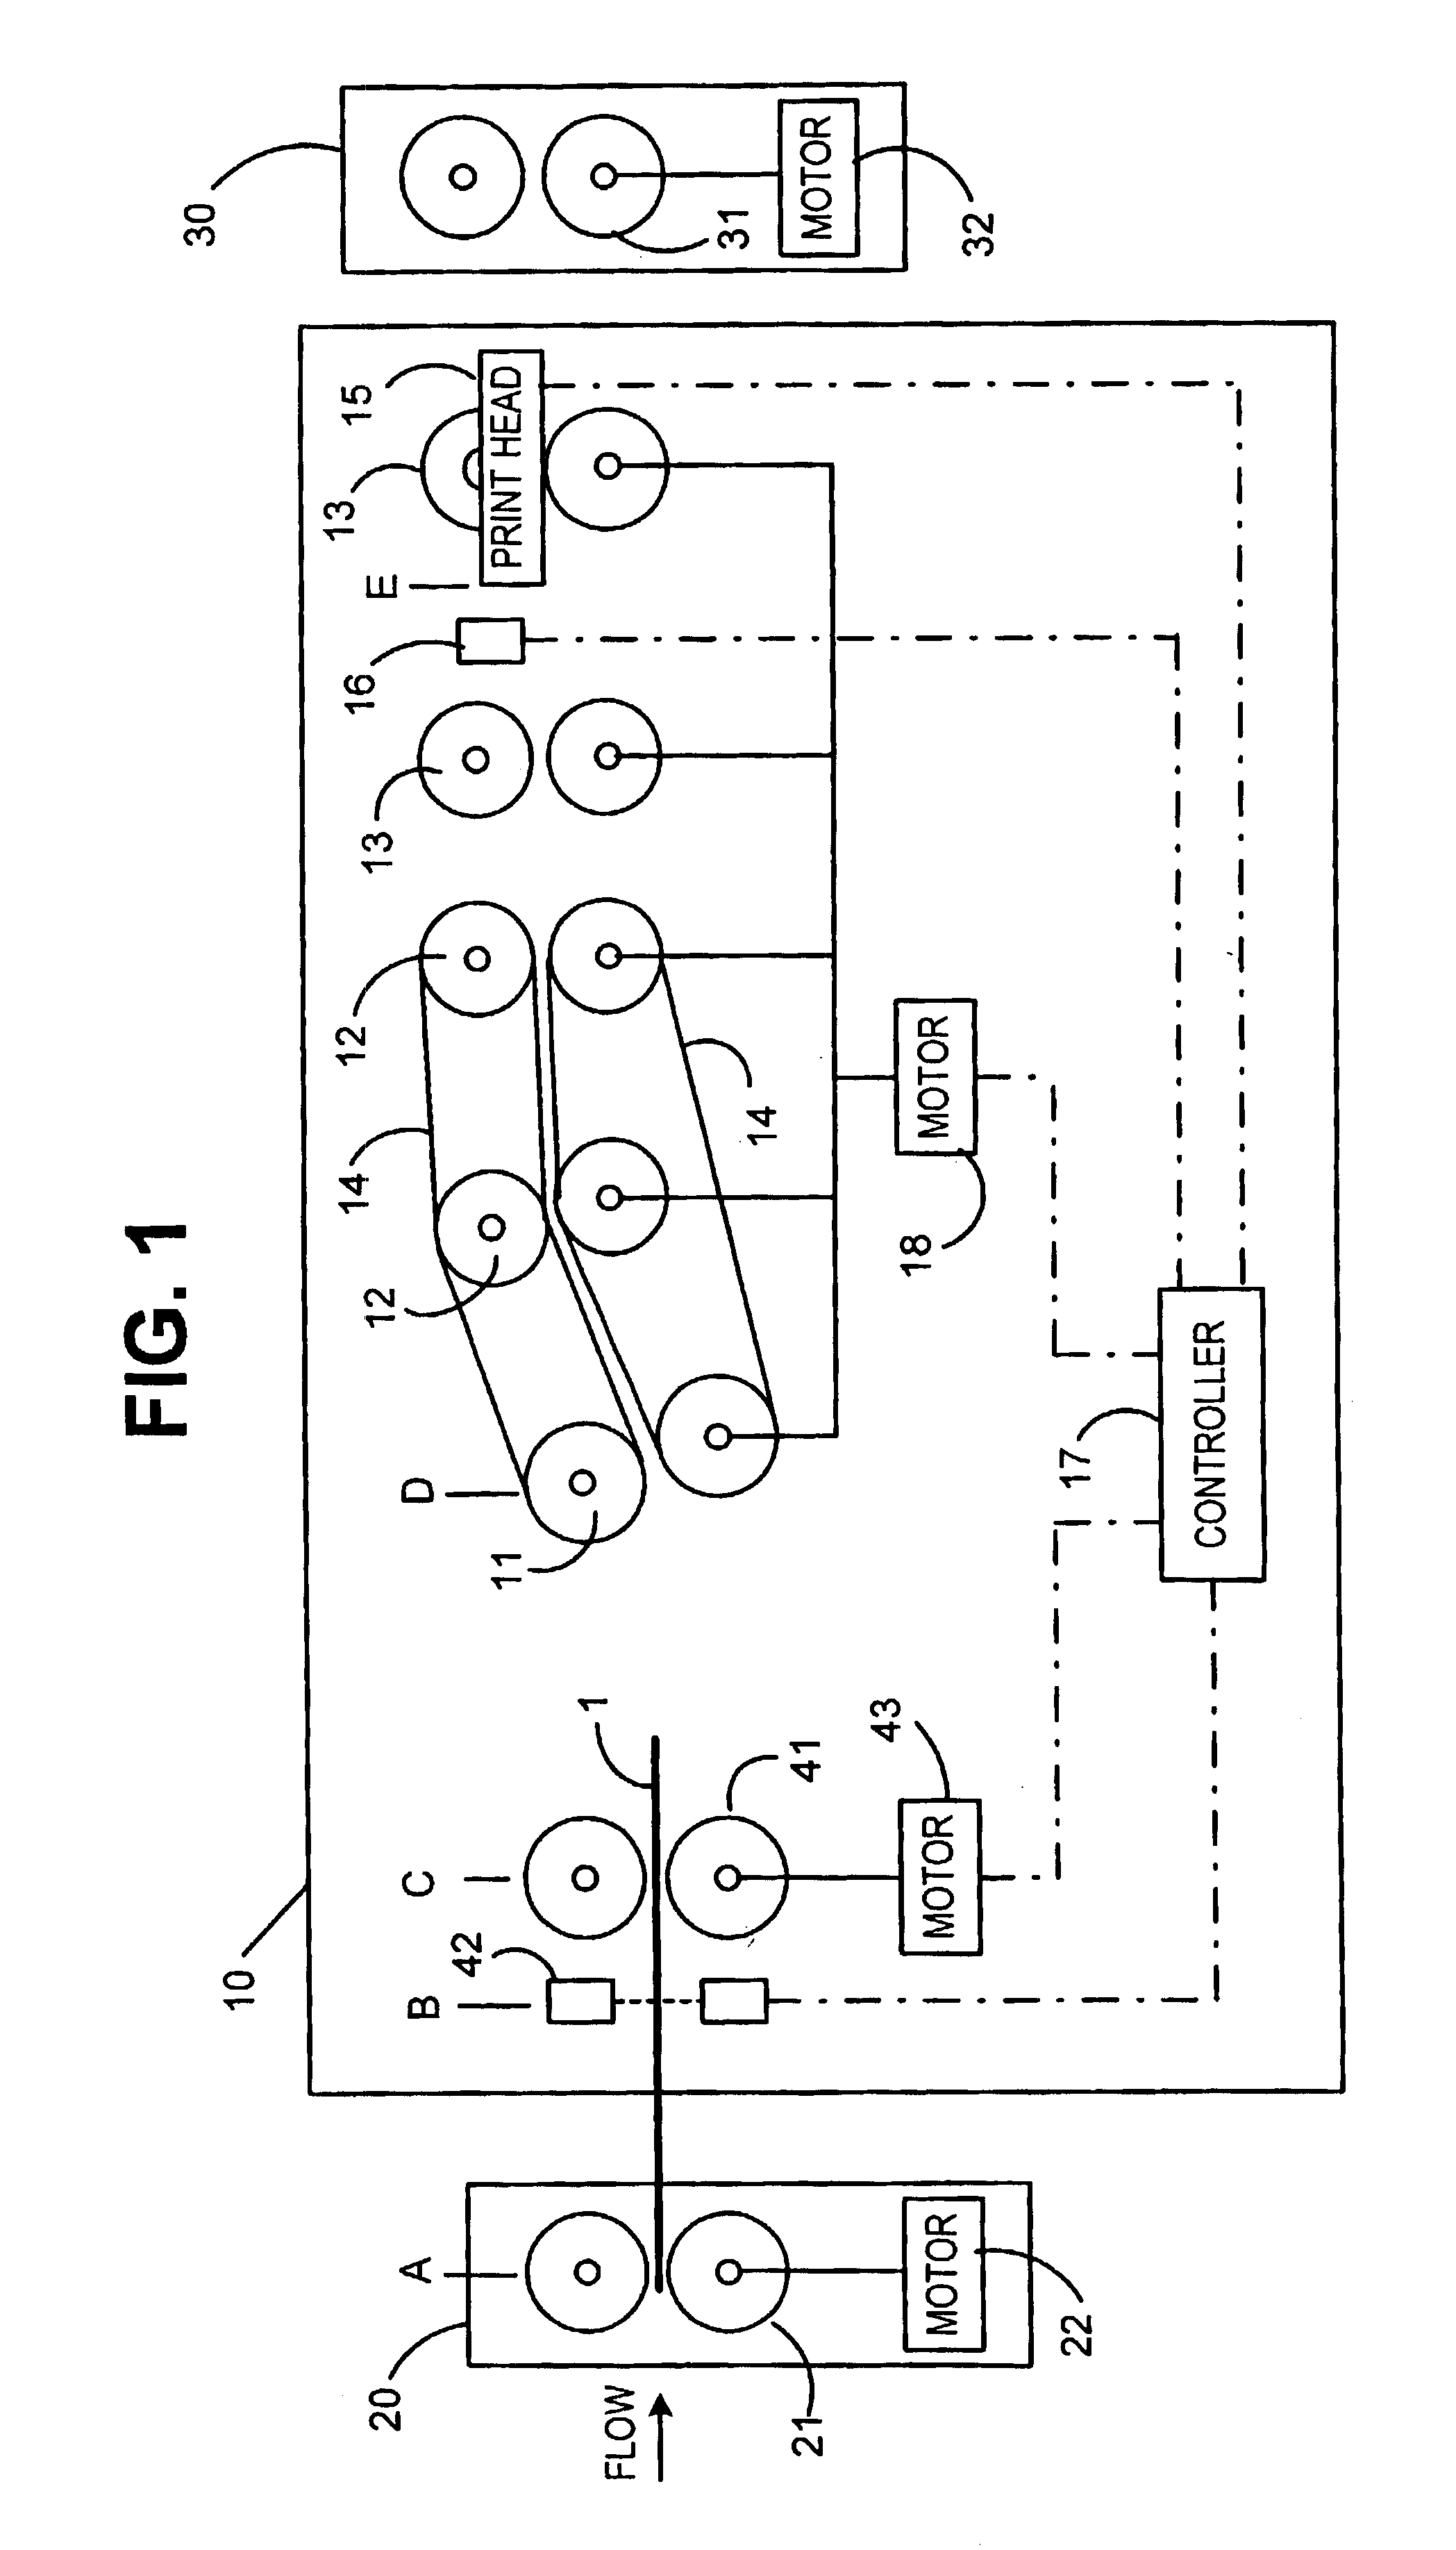 Method and system for high speed digital metering using overlapping envelopes